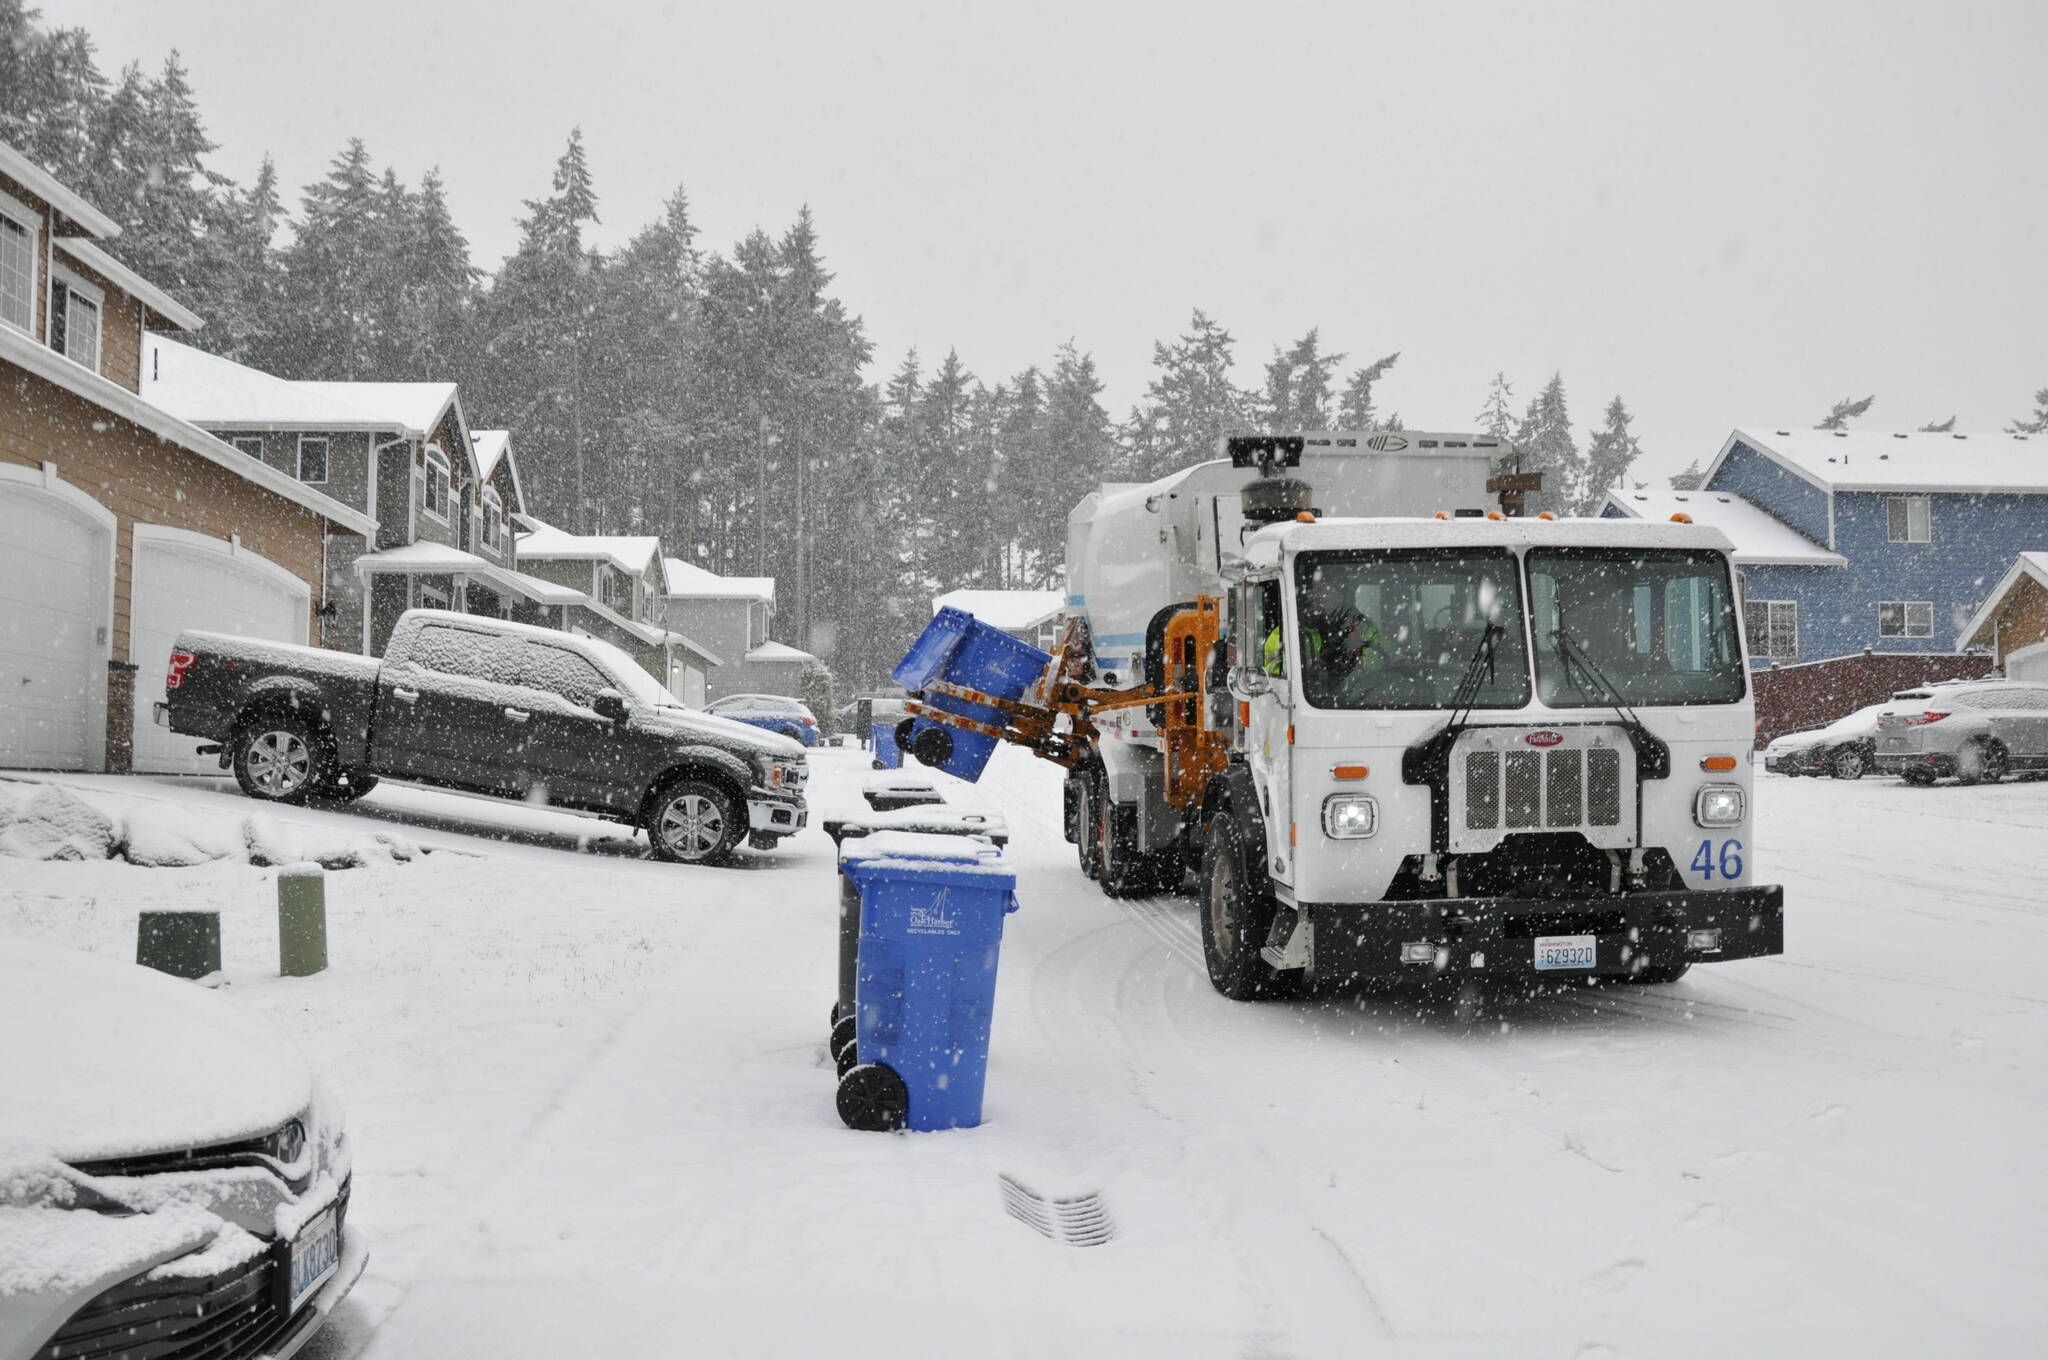 On January 18, 2024, Public Works Department staff George Place collects garbage and recycling from homes in Oak Harbor during the start of a snowstorm. (Photo courtesy of City of Oak Harbor Public Works)